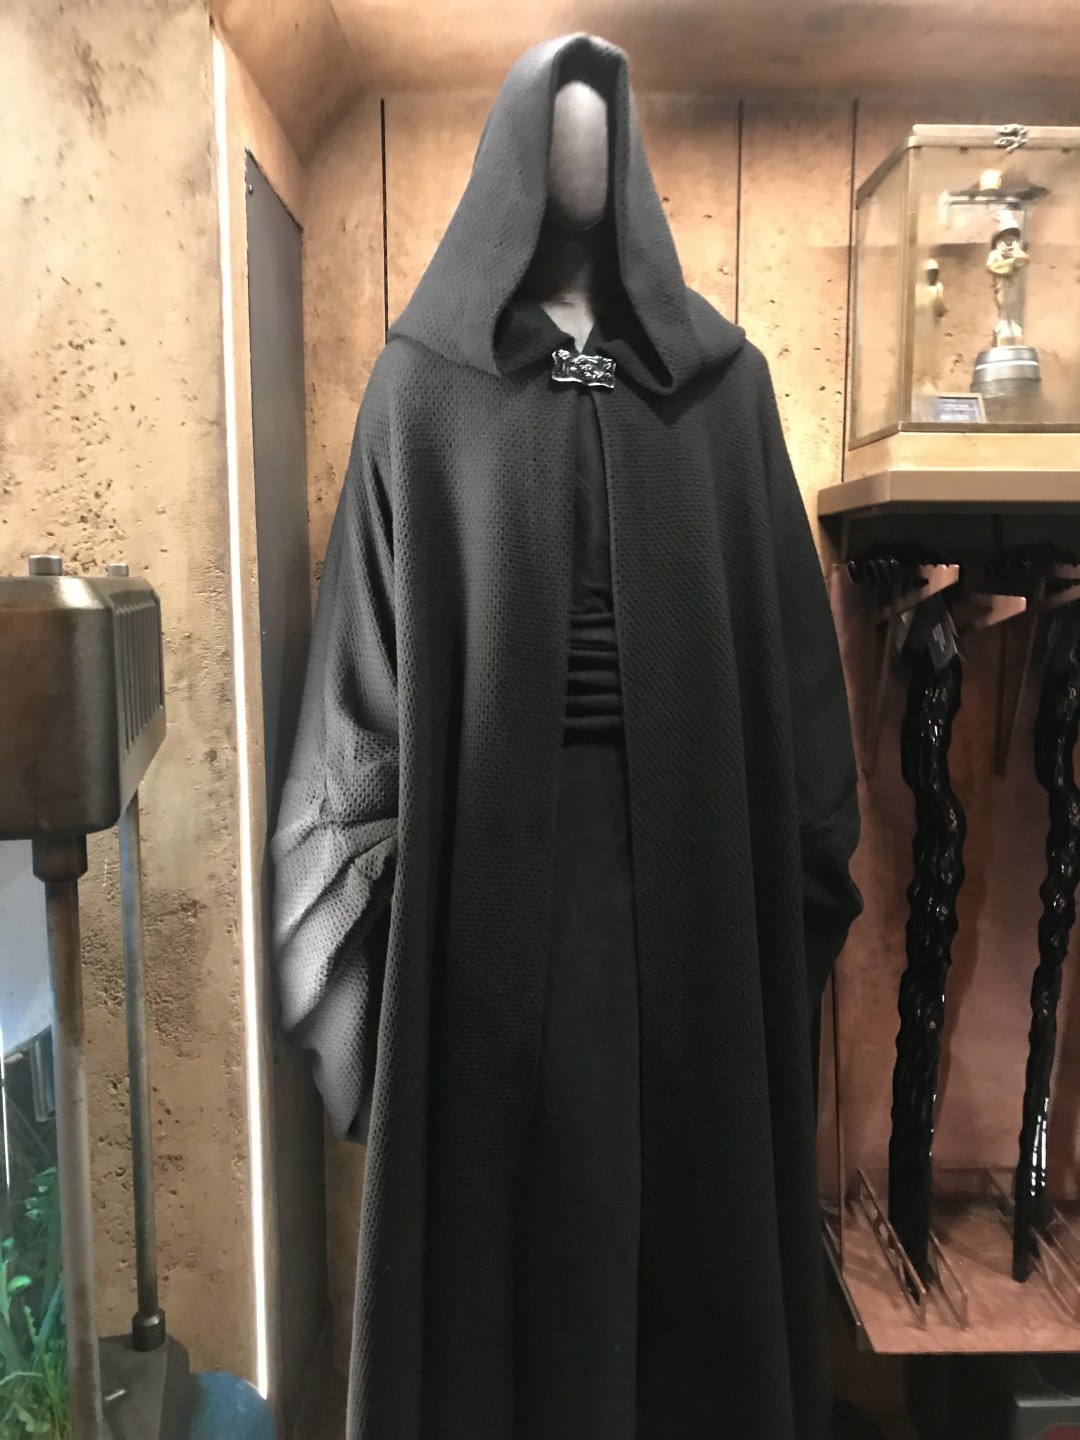 Galaxys edge emperors robes | RPF Costume and Prop Maker Community